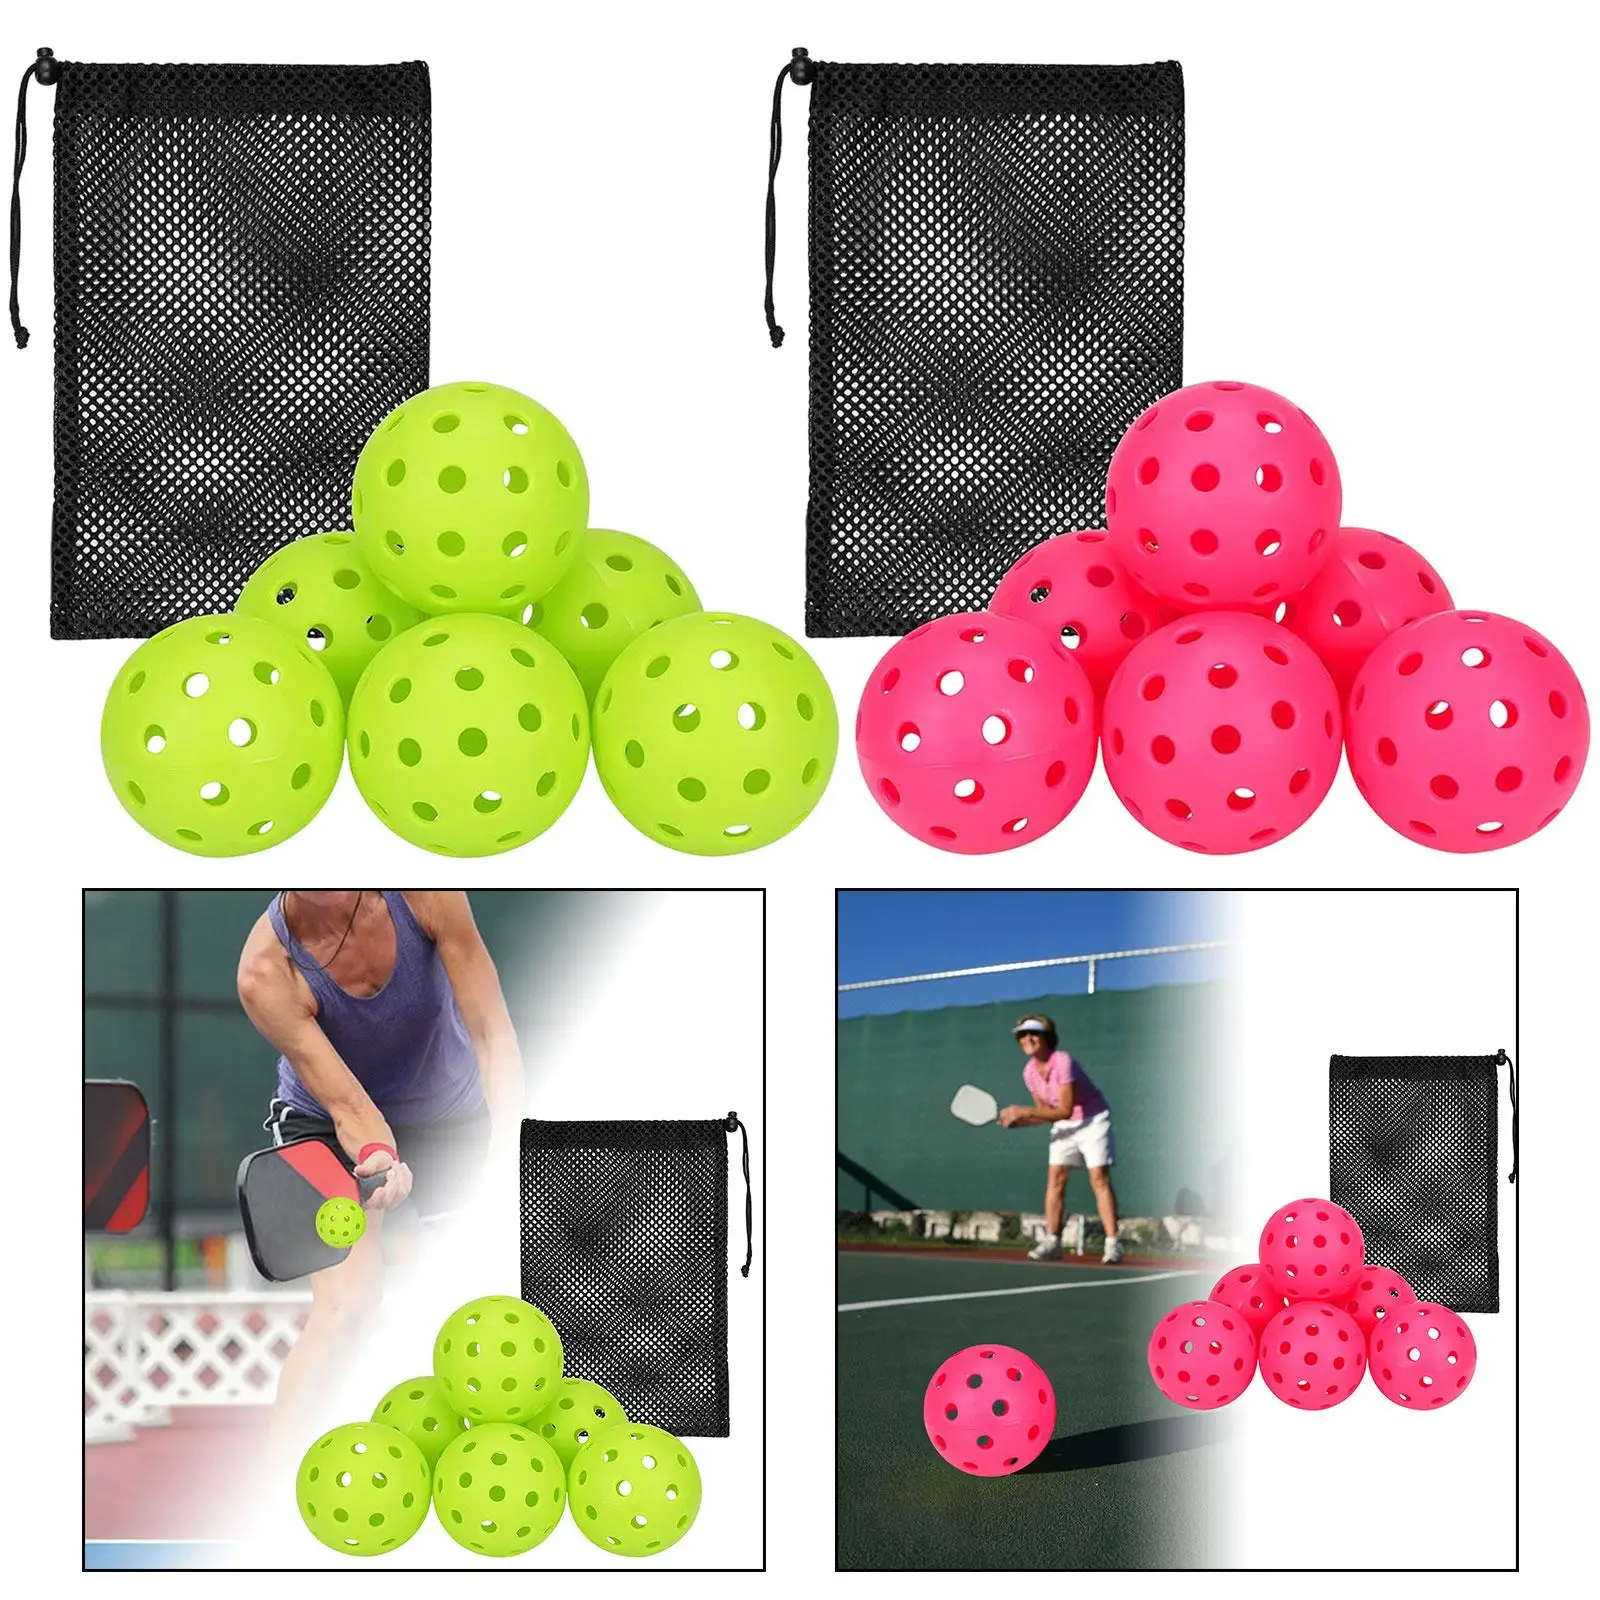 6x Pickleball Balls Professional Specifically Designed Durable Official Size Ball for Outdoor Courts Sanctioned Tournament Play